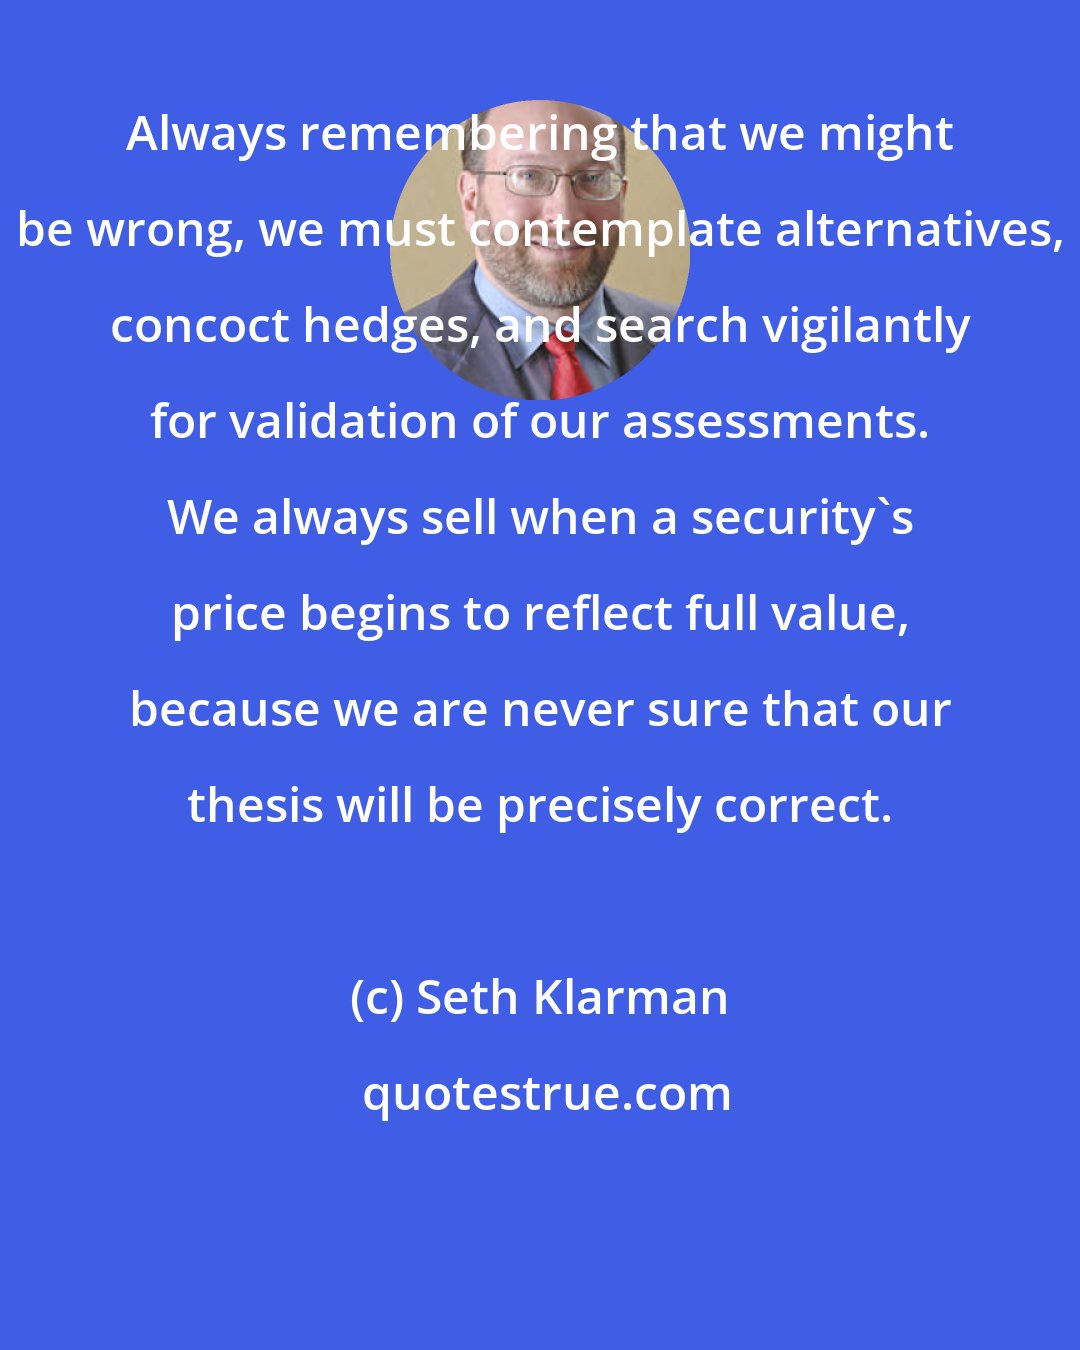 Seth Klarman: Always remembering that we might be wrong, we must contemplate alternatives, concoct hedges, and search vigilantly for validation of our assessments. We always sell when a security's price begins to reflect full value, because we are never sure that our thesis will be precisely correct.